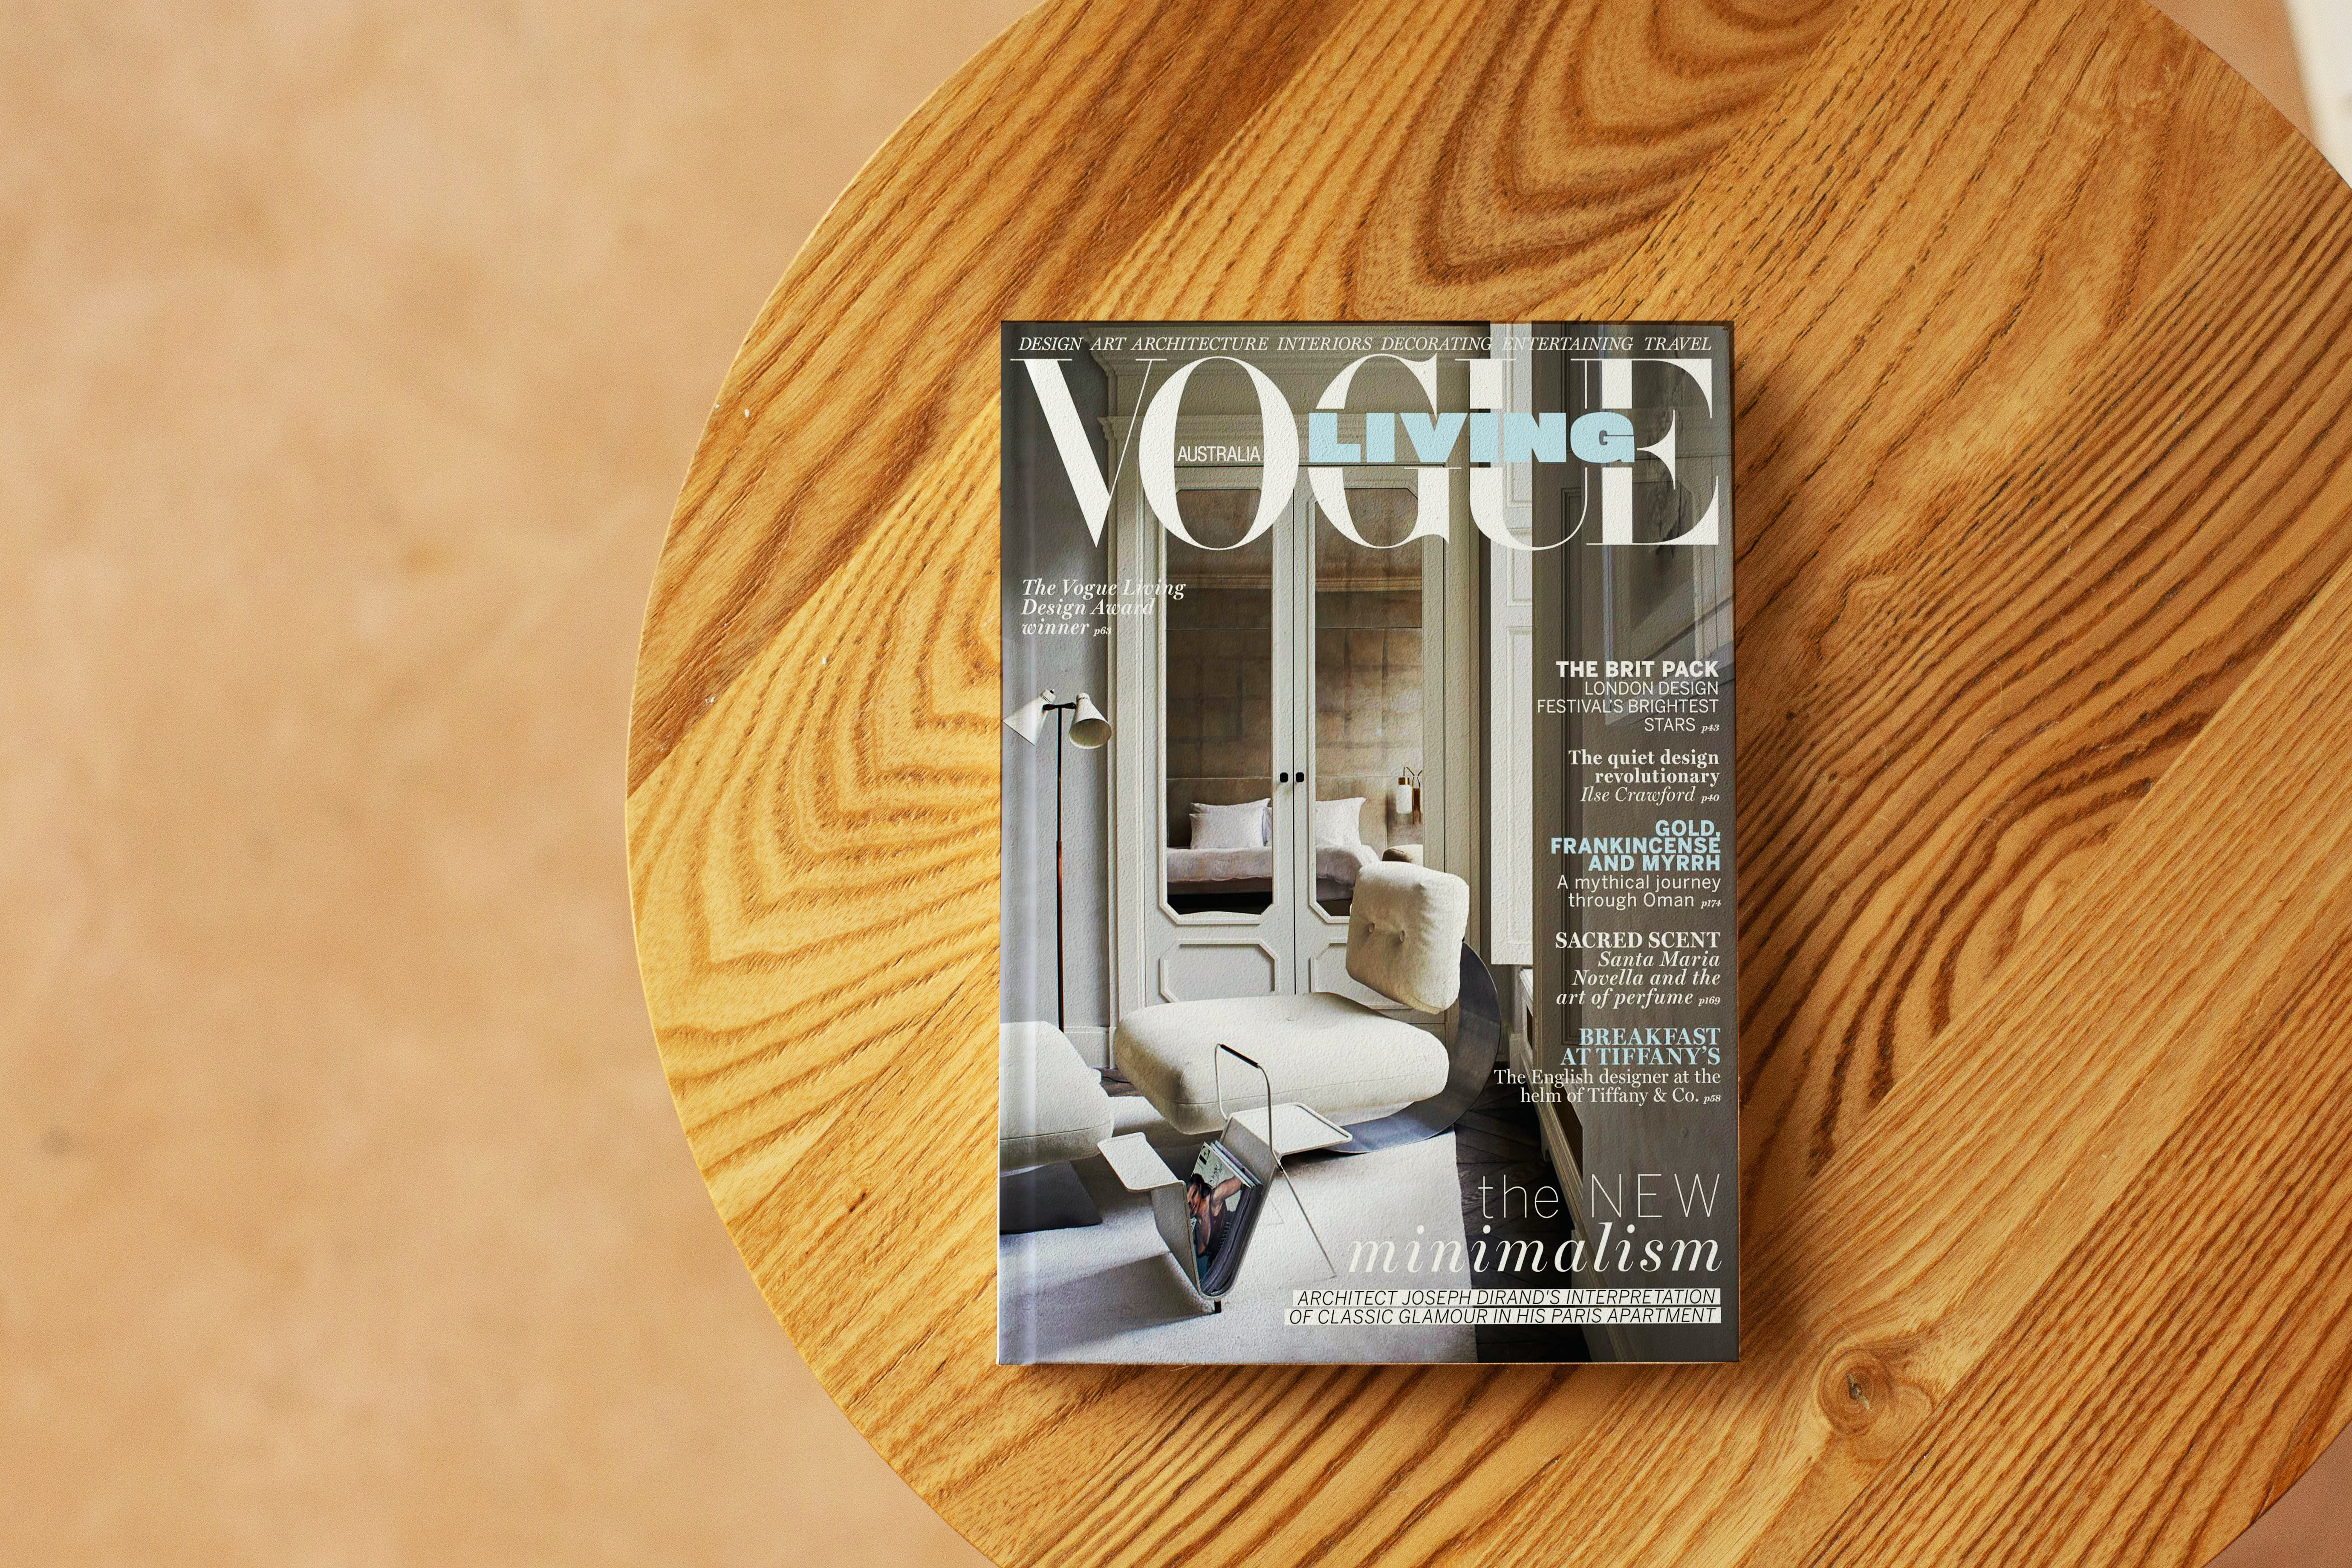 VOGUE BOOK ON COFFEE TABLE.jpg